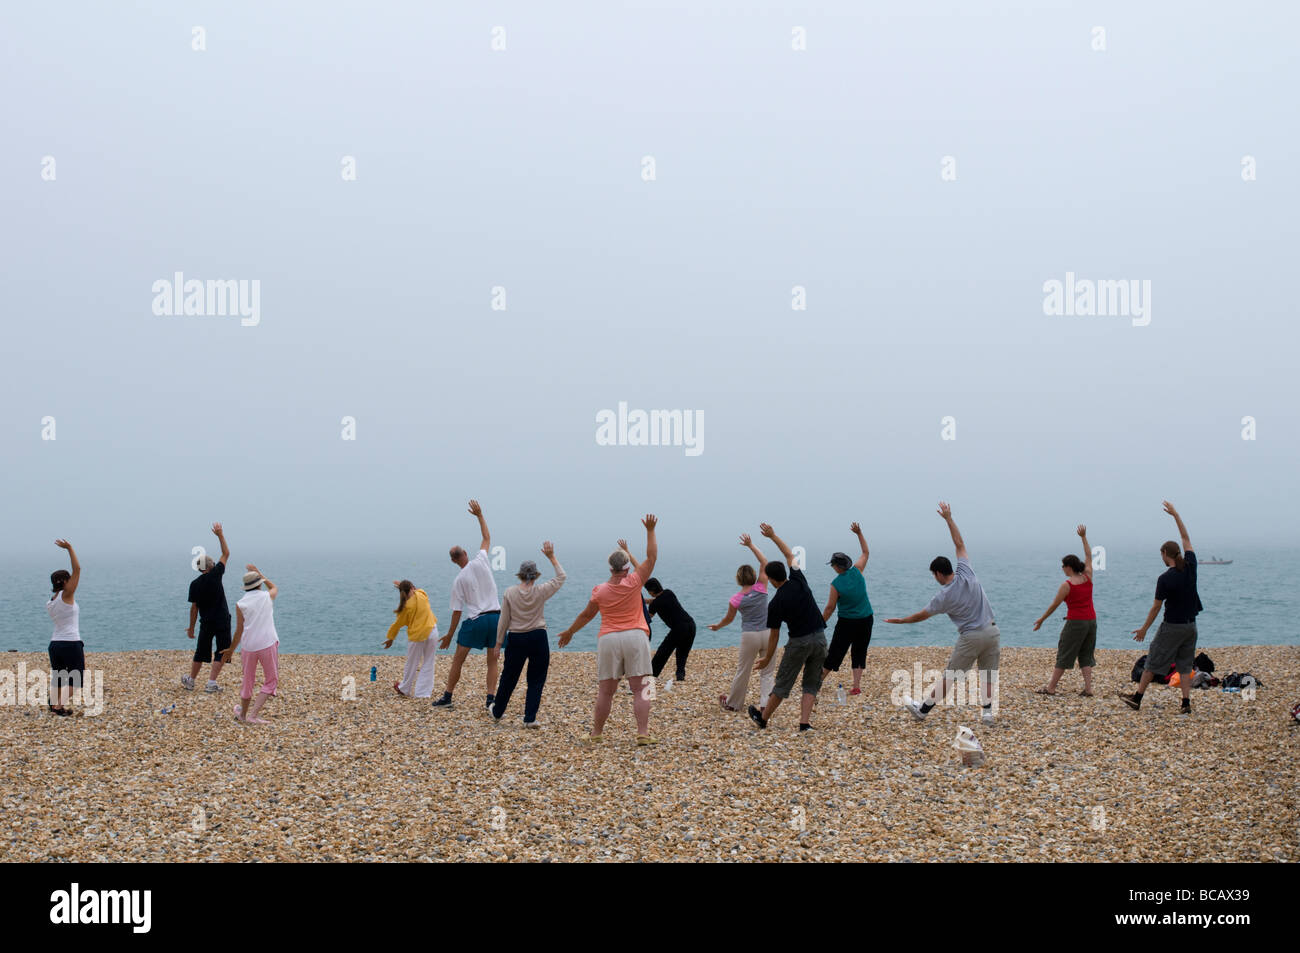 UNITED KINGDOM, ENGLAND, 4th July 2009. A class takes place on the beach in Eastbourne. Stock Photo